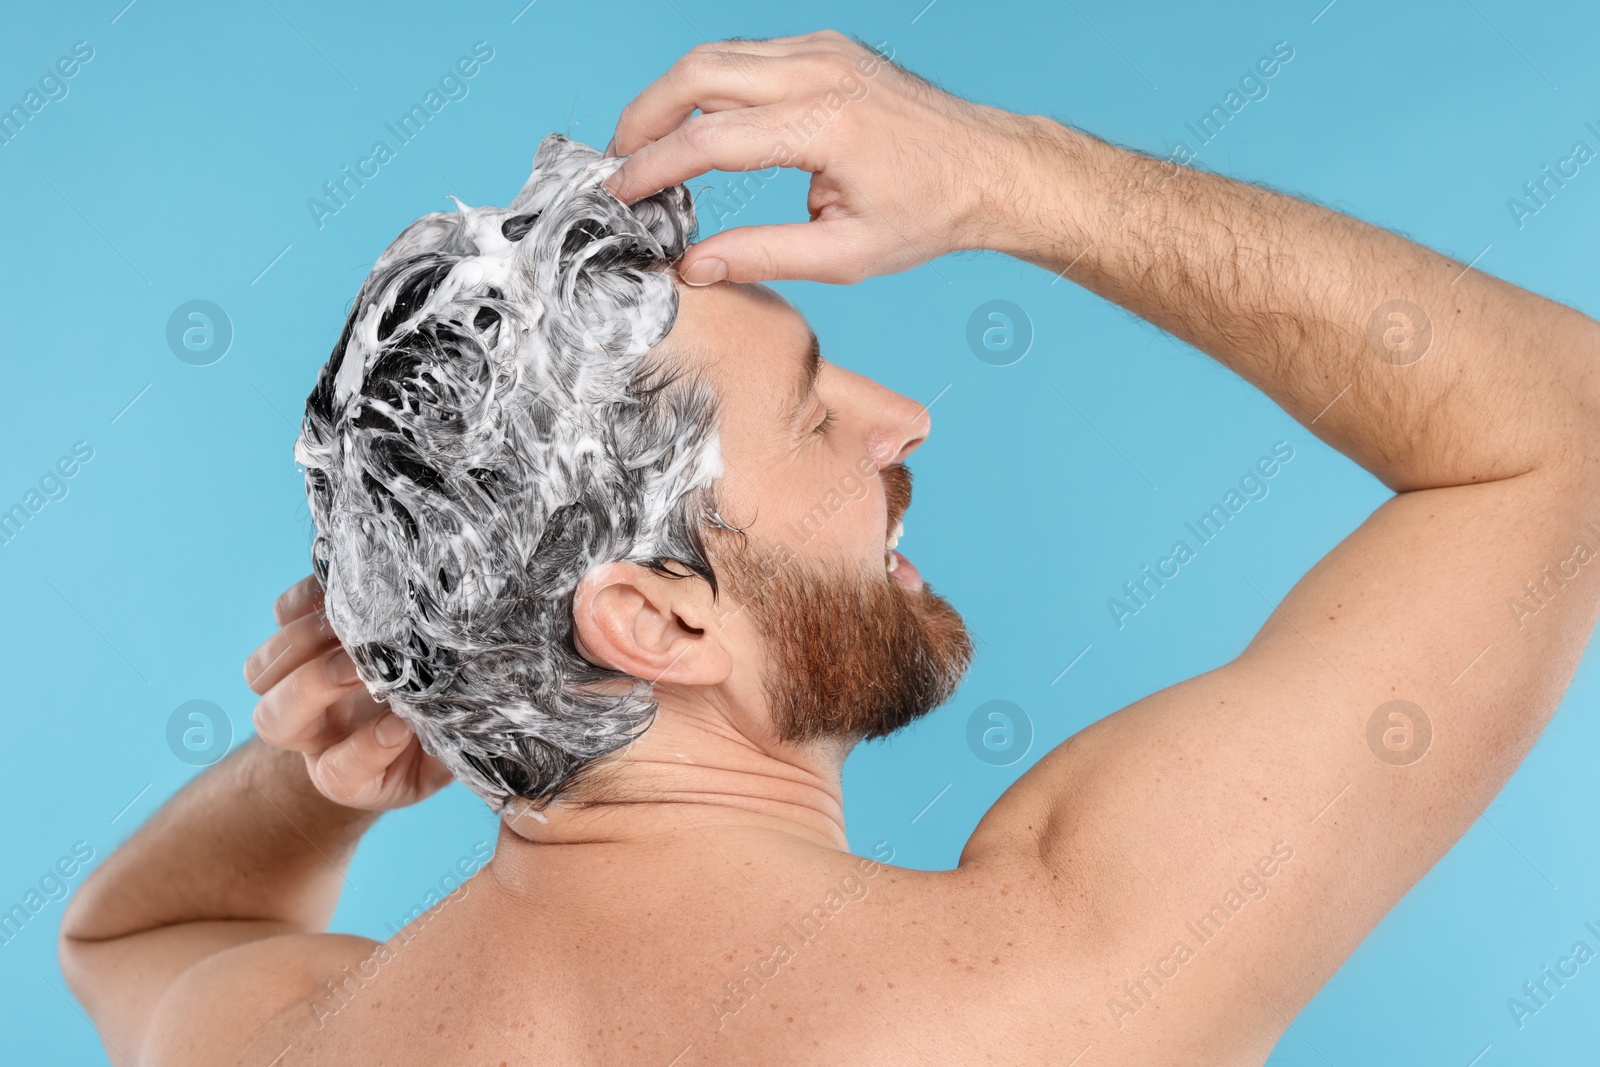 Photo of Man washing his hair with shampoo on light blue background, back view